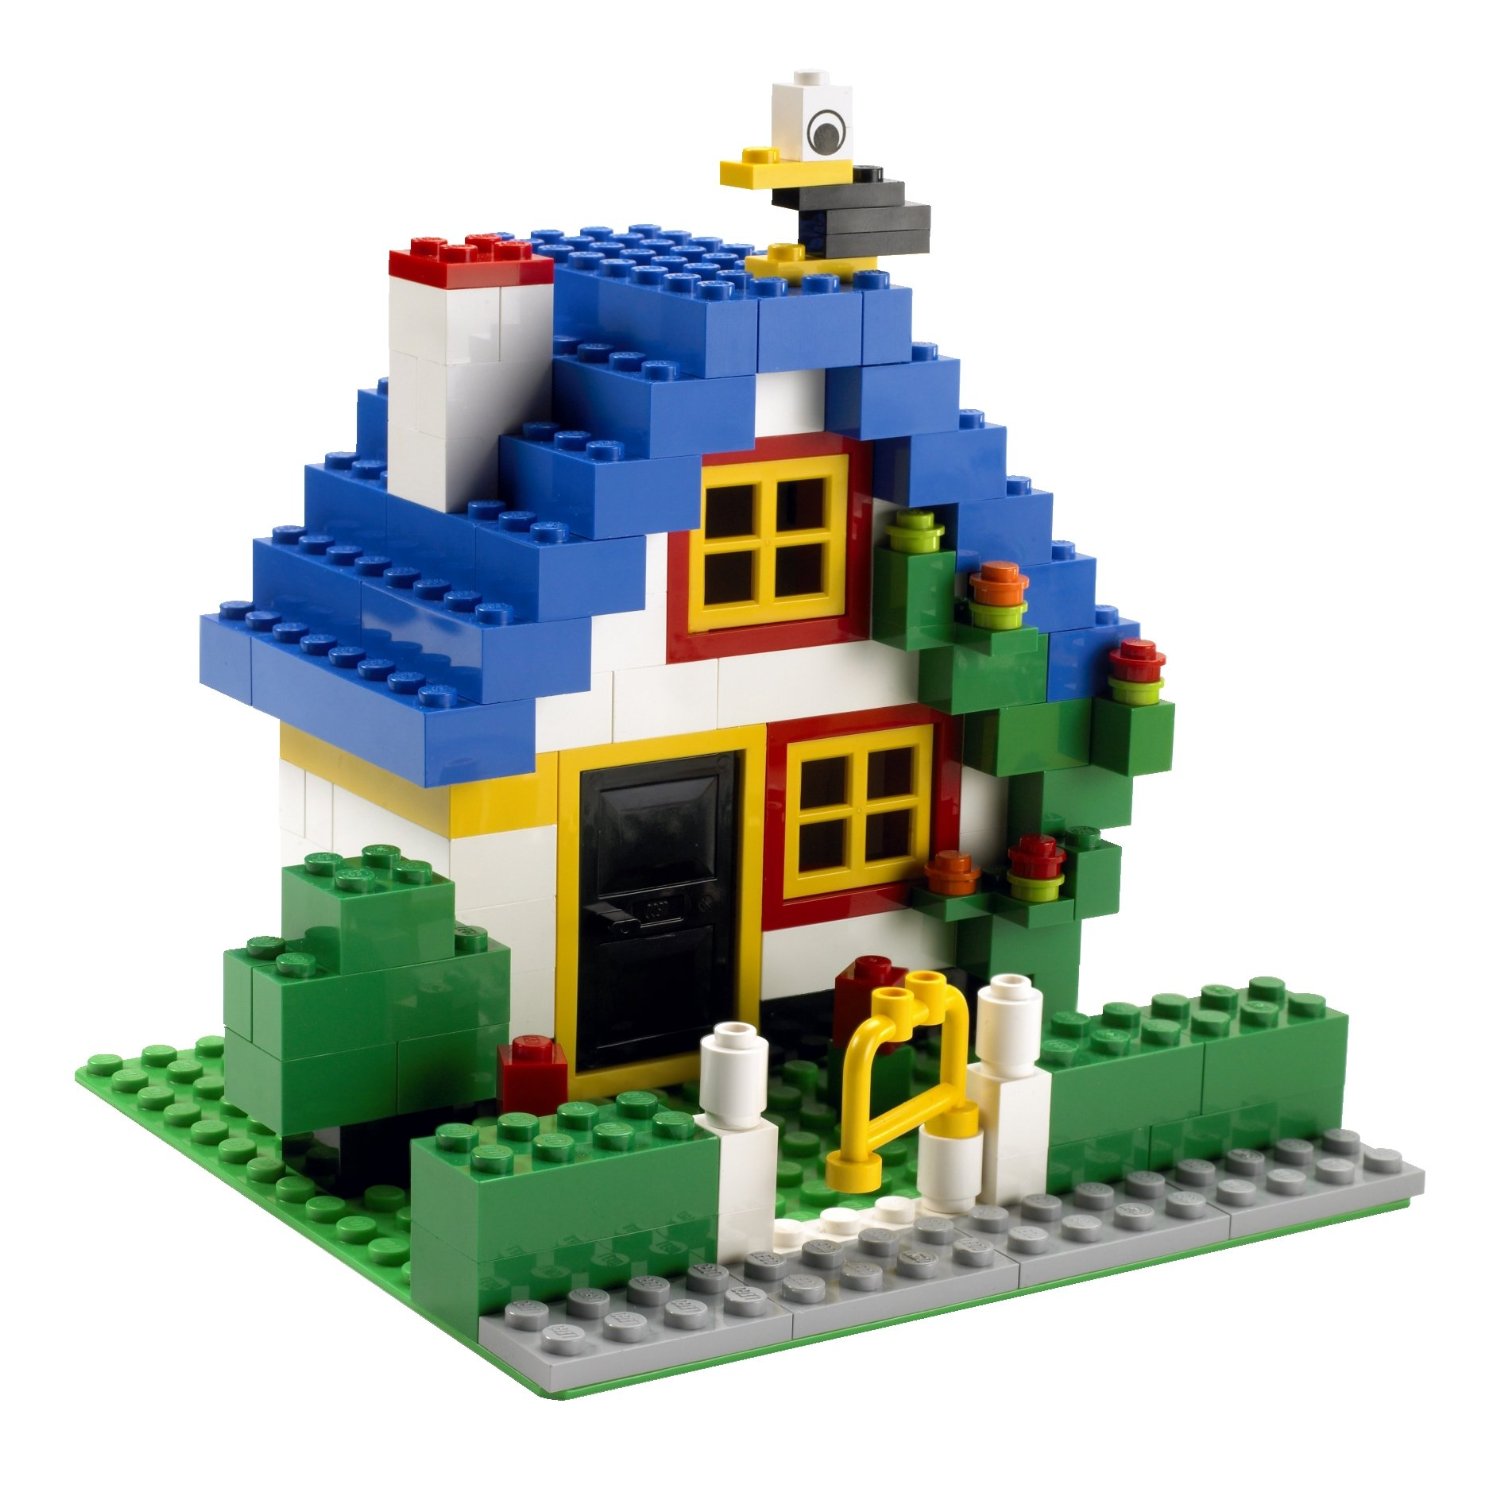 Easy Lego House Instructions They are mattoncini lego , a